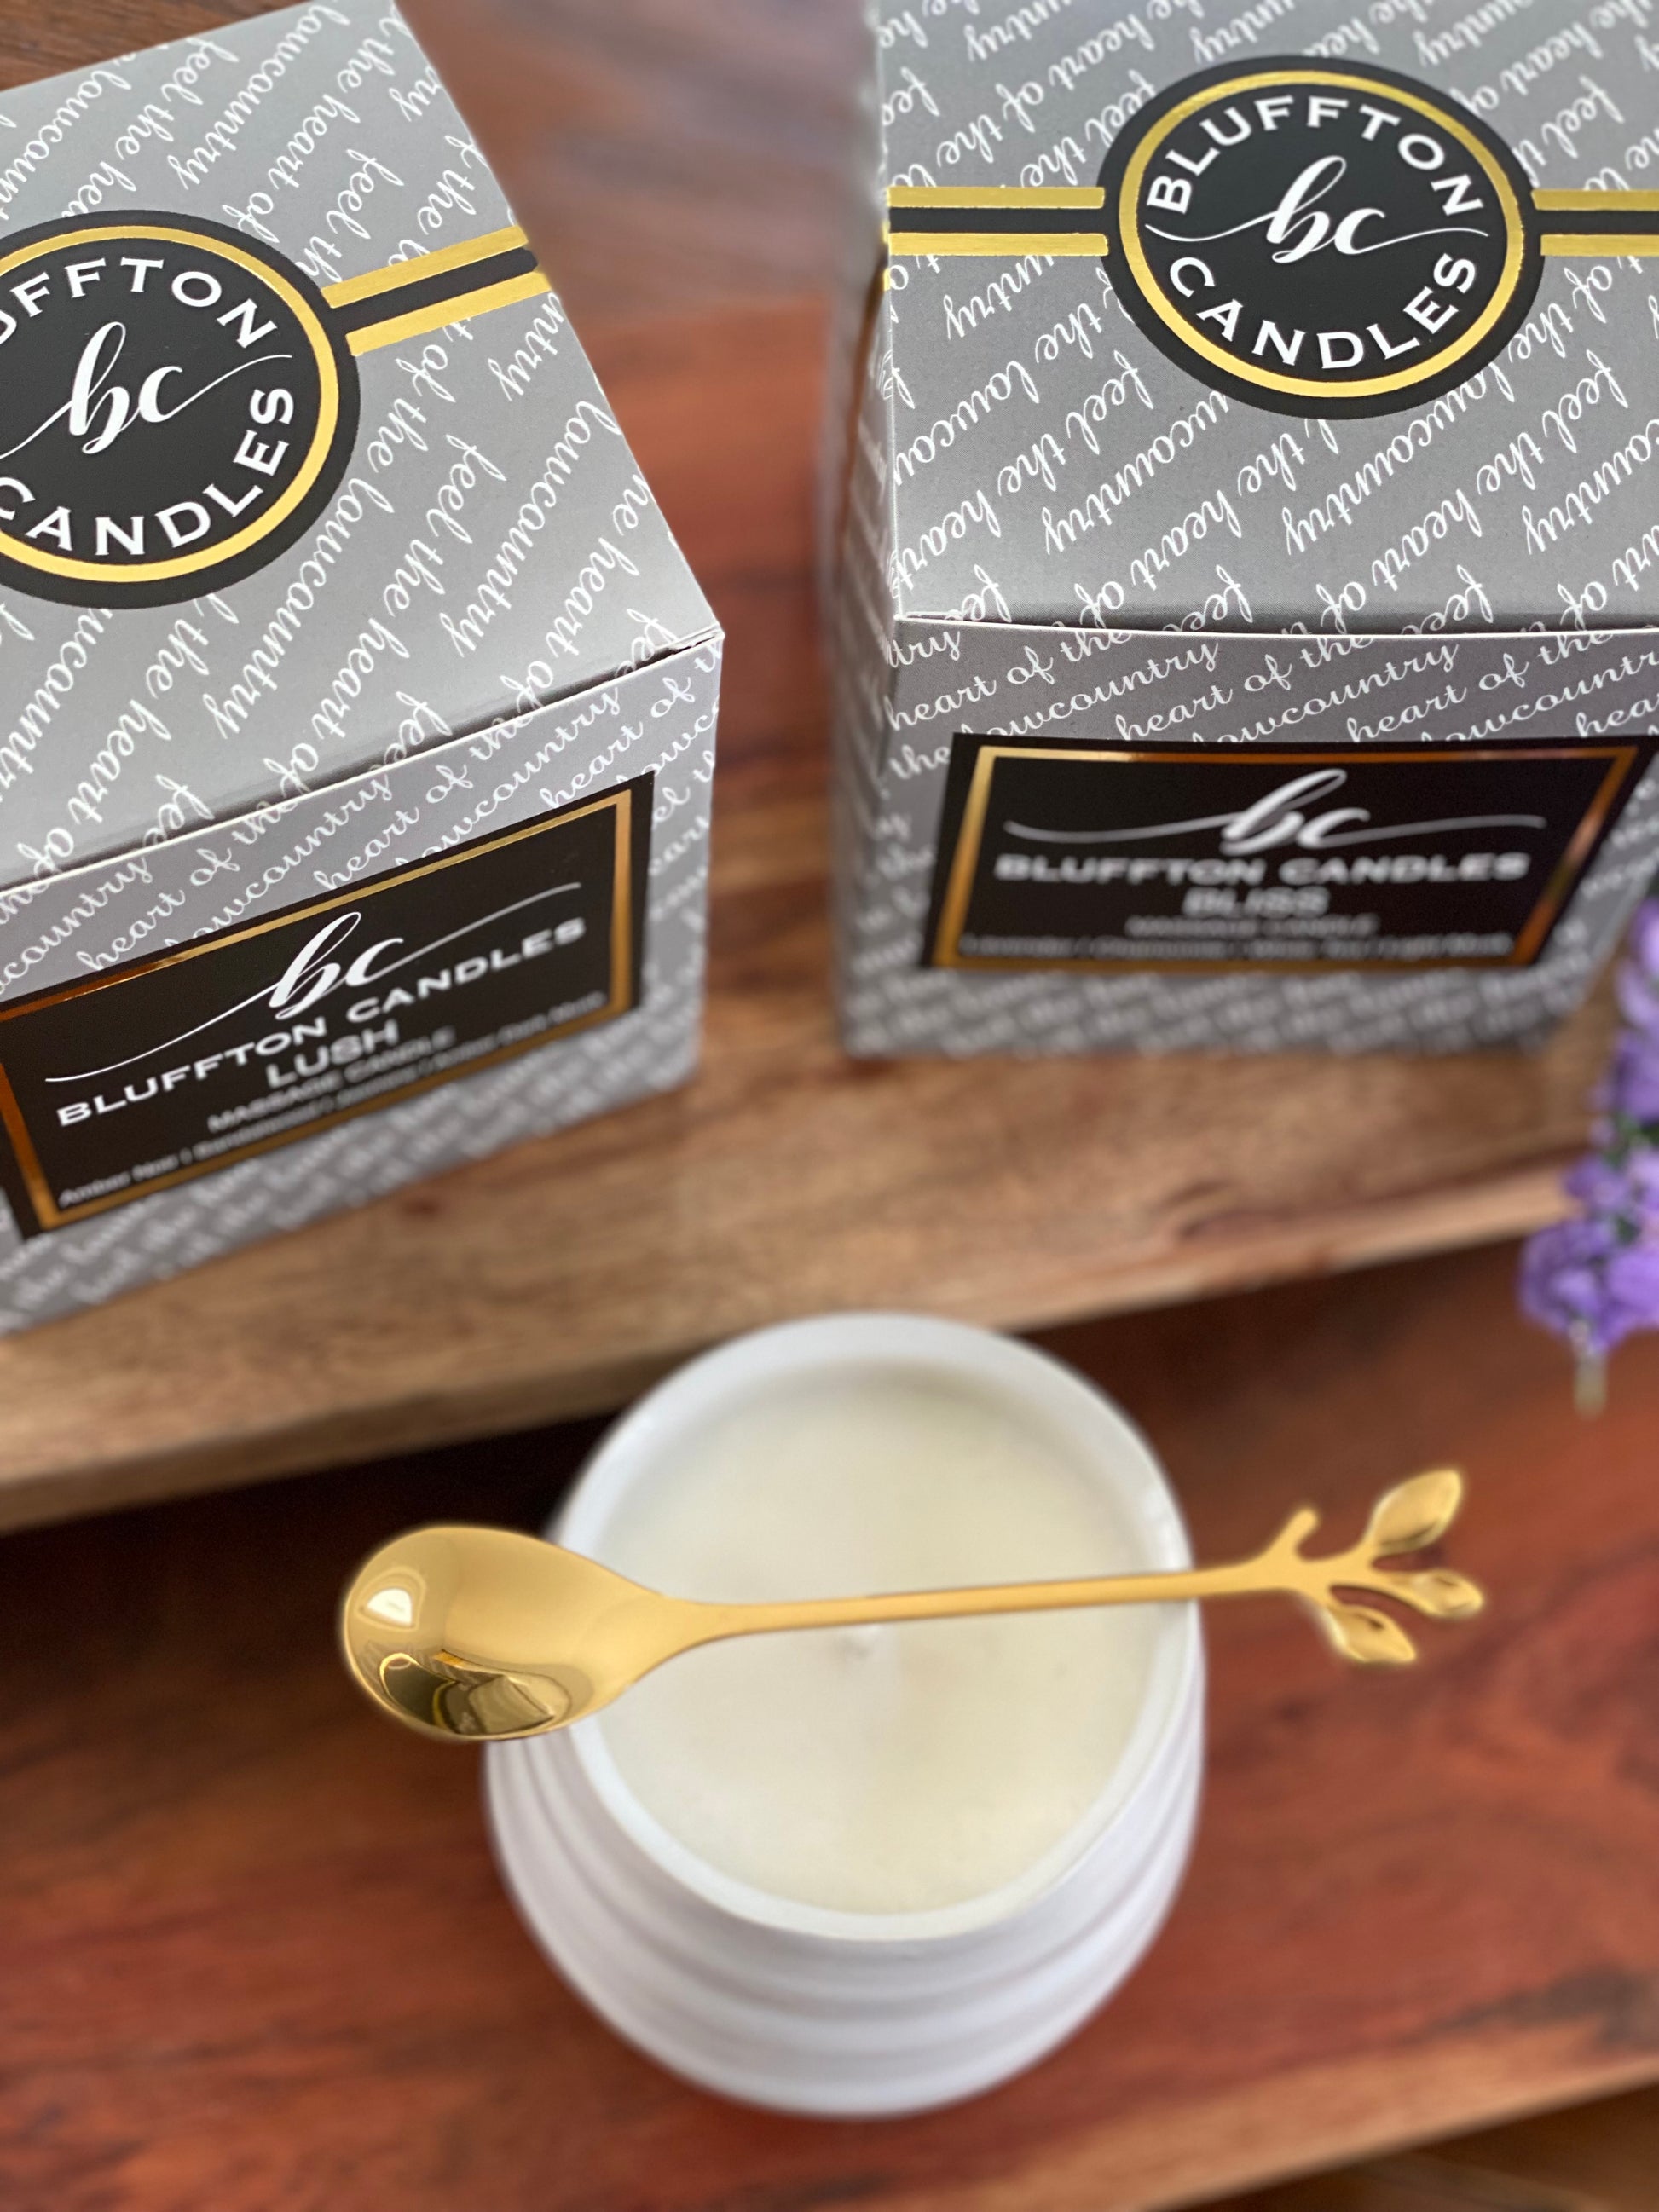 Massage Candle | BLISS | 5 oz. Lavender Tea & Tonic | Cucumber | Honeydew | Chamomile | White Tea | Light Musk. Bluffton Candles - The Bluffton Shop - Gift Shops